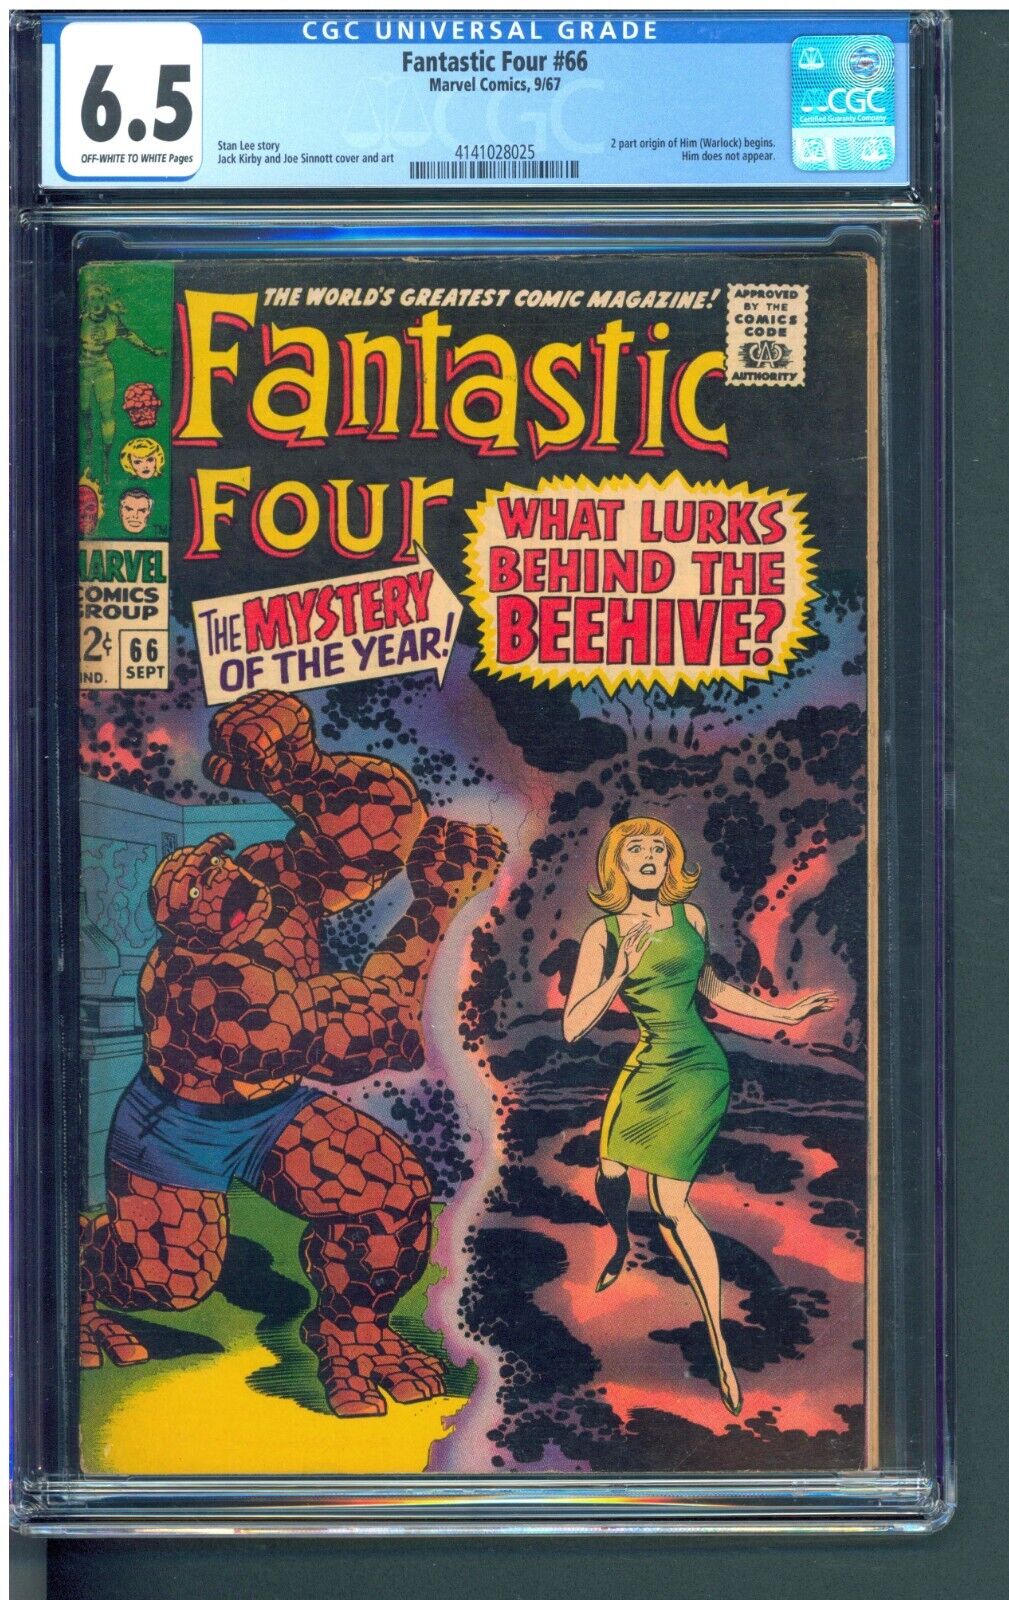 FANTASTIC FOUR #66   CGC 6.5 FN+  NICE OFF WHITE/WHITE PAGES  ORIGIN WARLOCK